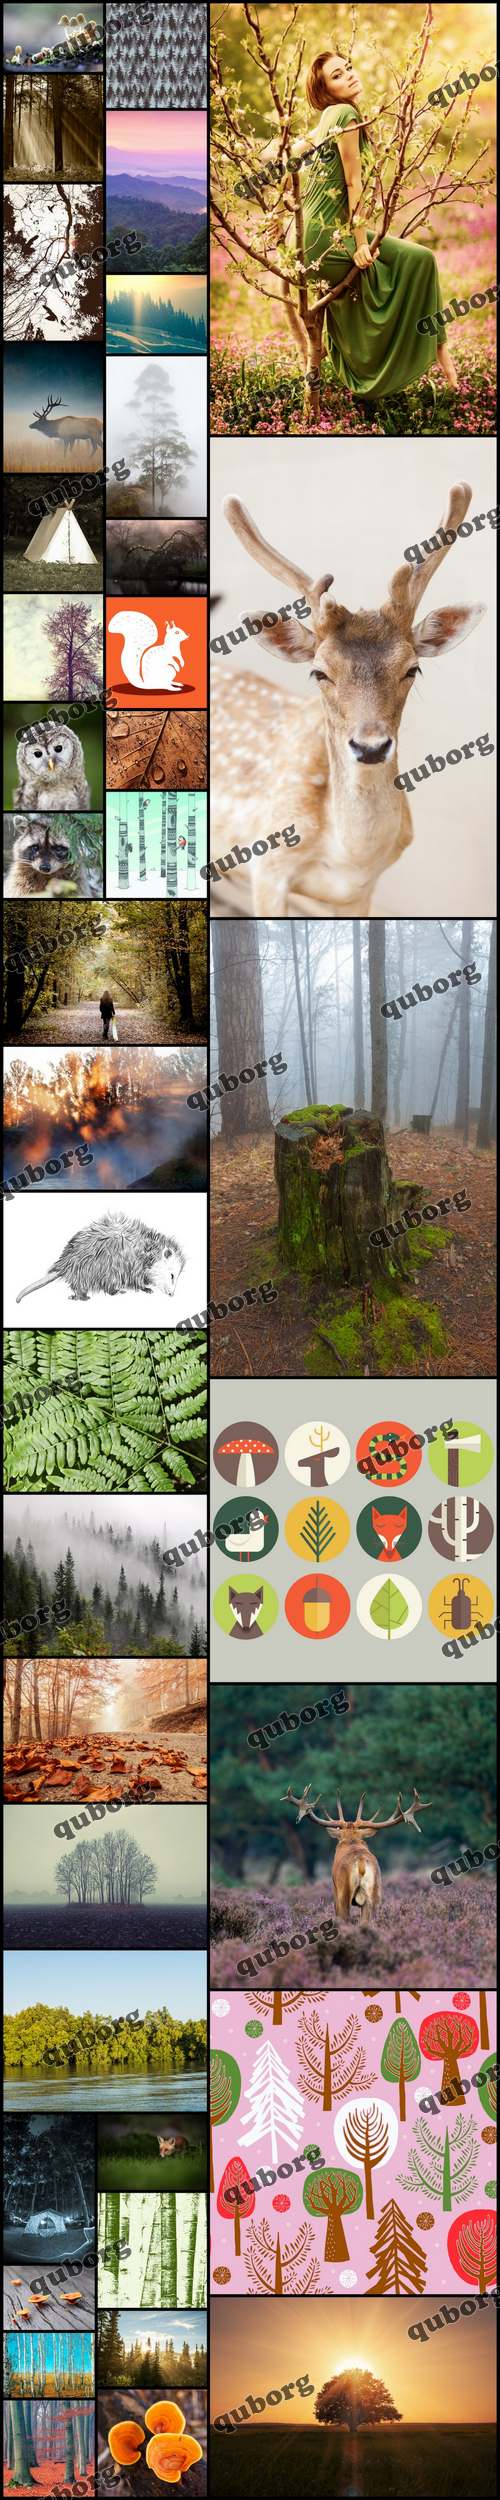 Stock Photos - Into The Wood